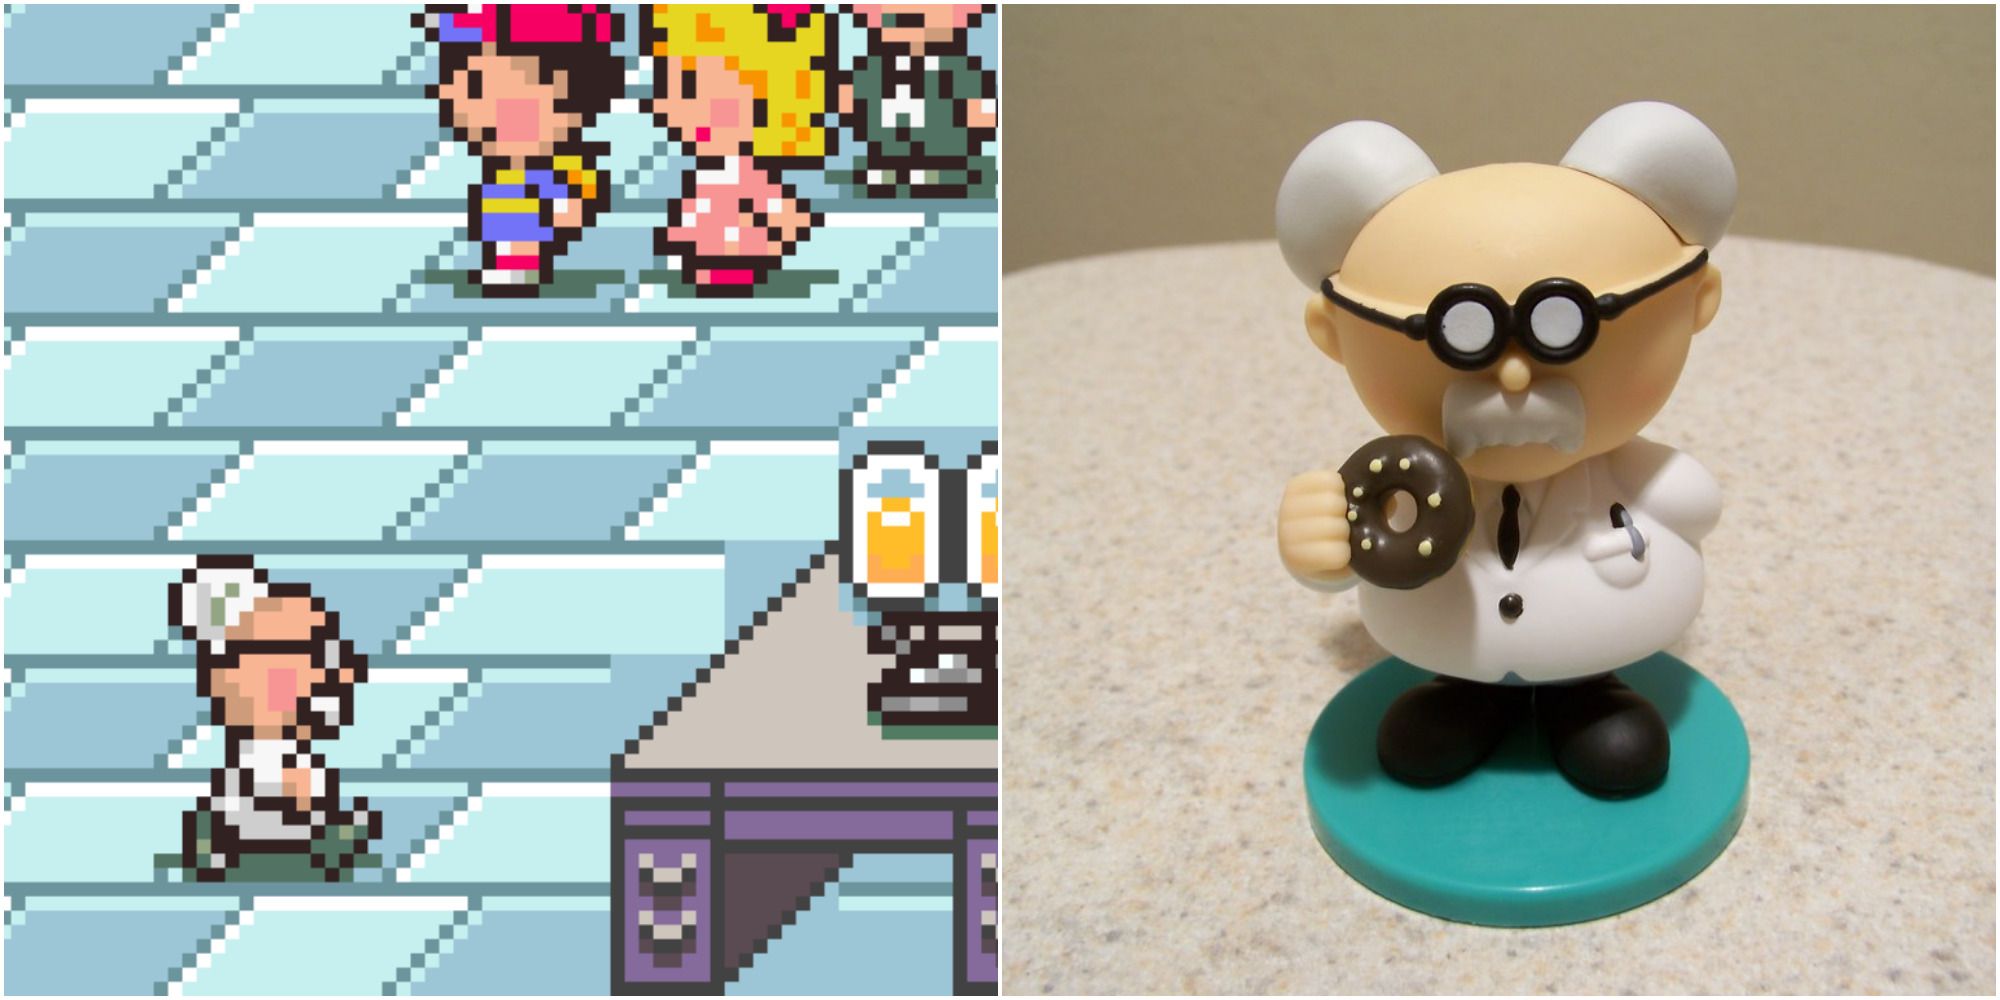 A collage showing Ness and Paula standing by Dr. Andonuts, Jeff's father, in Earthbound, alongside a figurine of Dr. Andonuts holding a donut